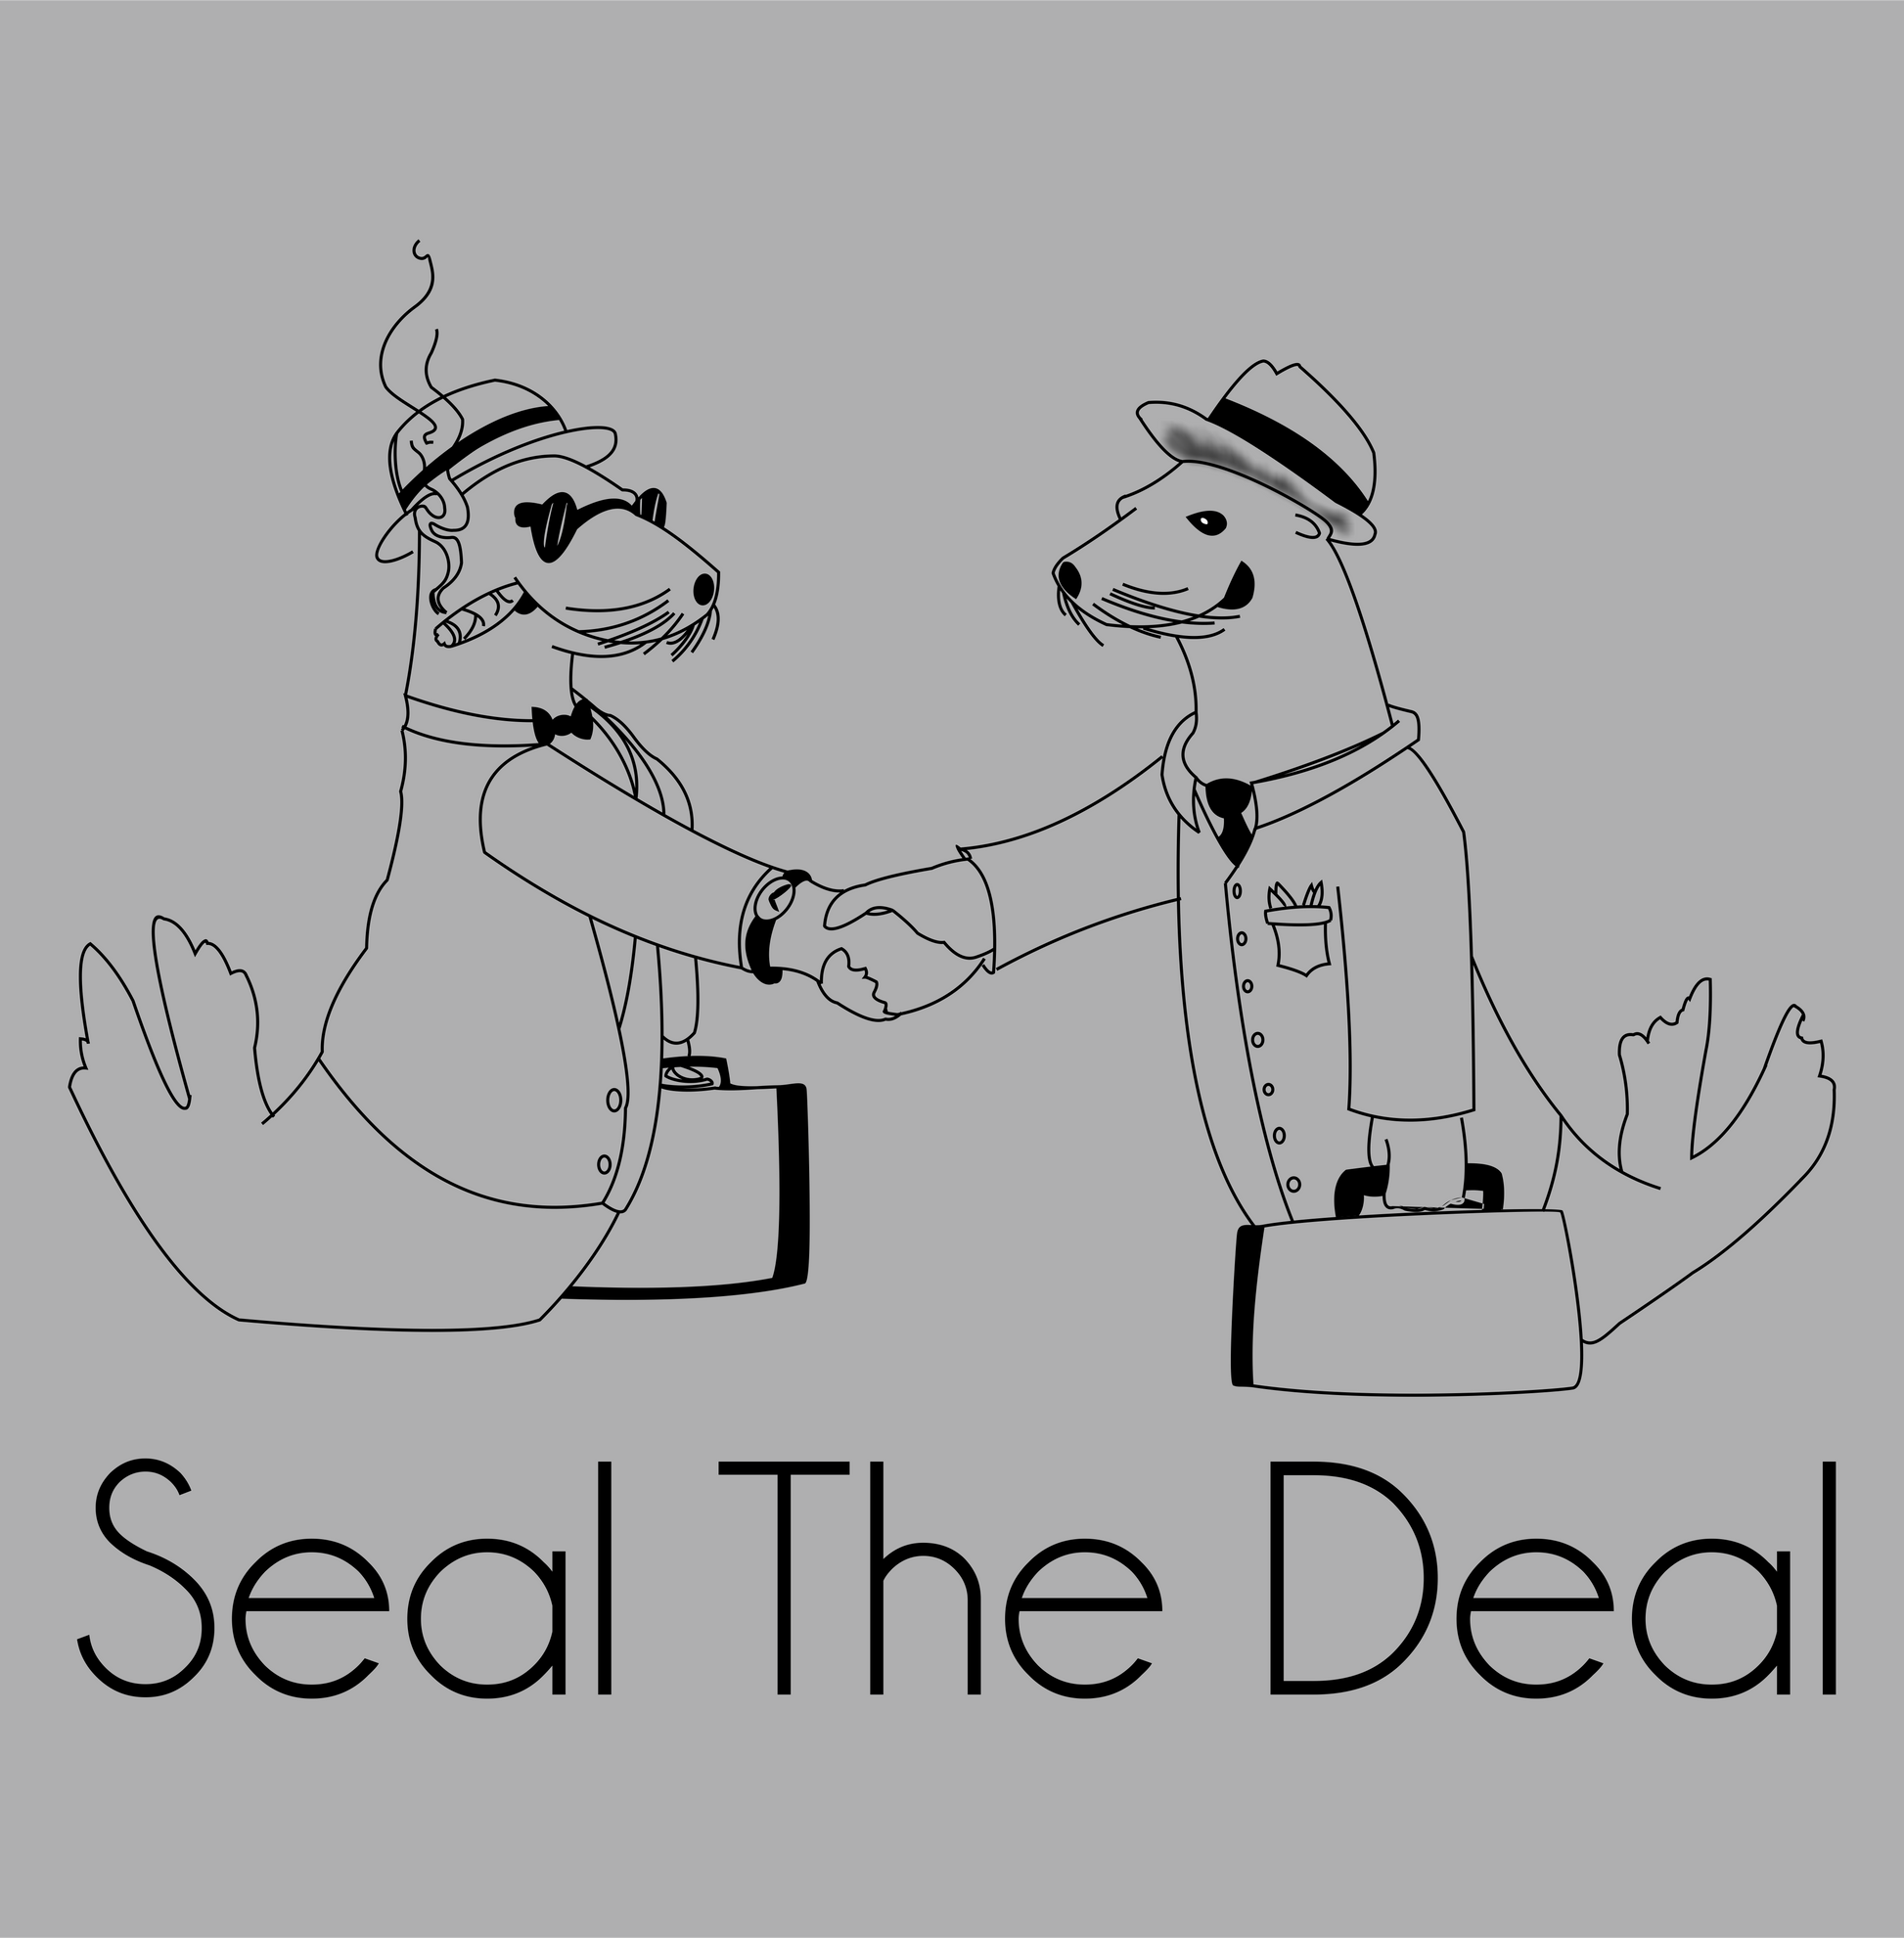 seal the deal seals shaking hands business DTG design graphic